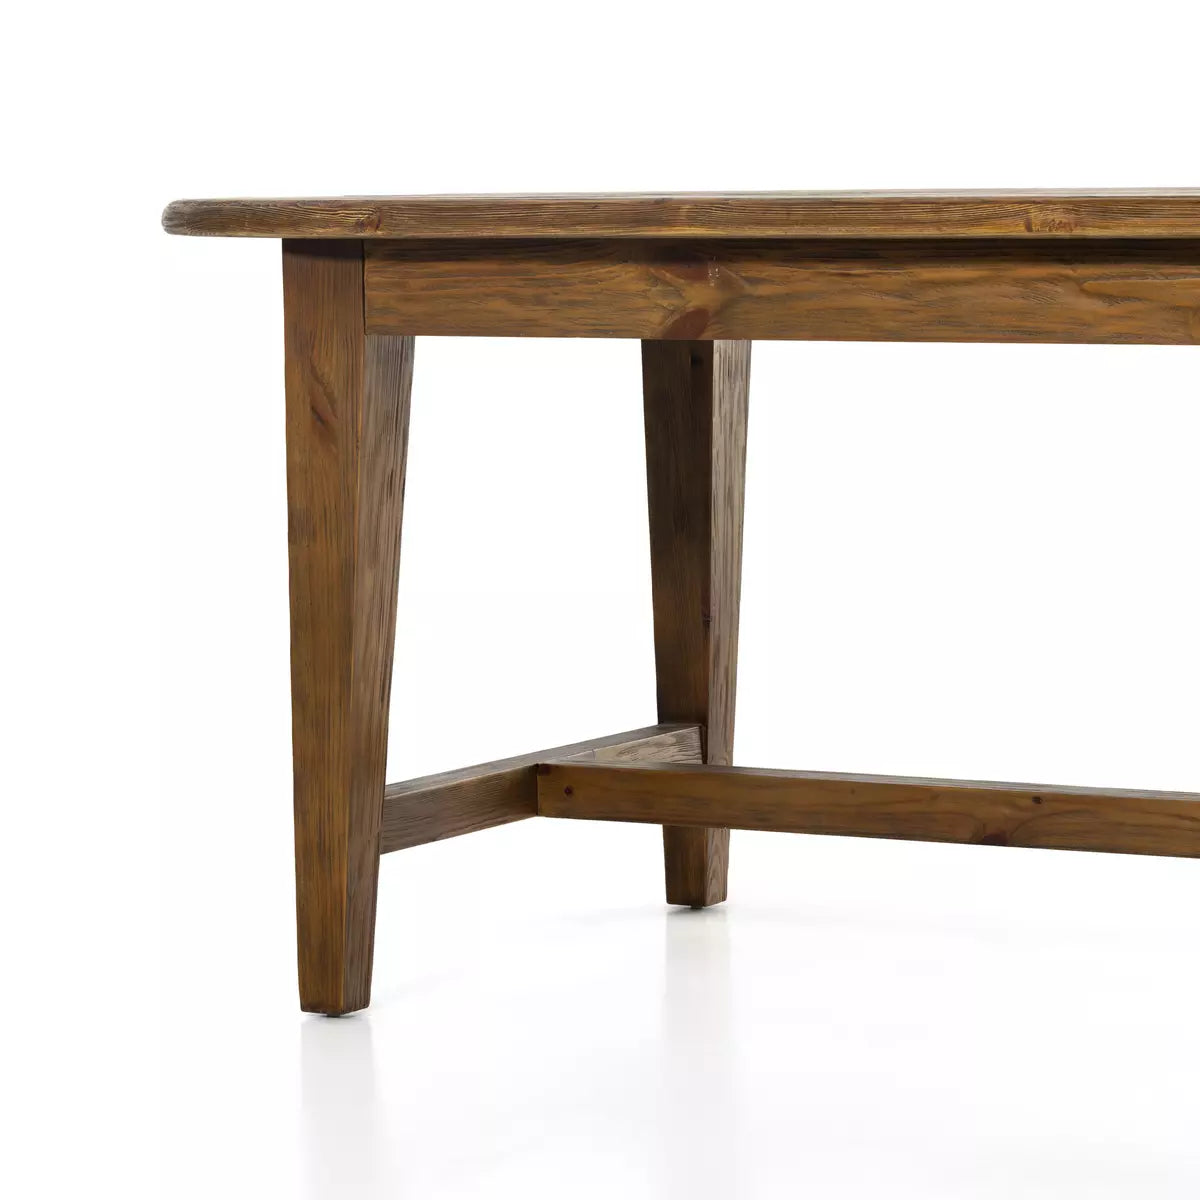 Alfie Dining Table Waxed Pine 87"